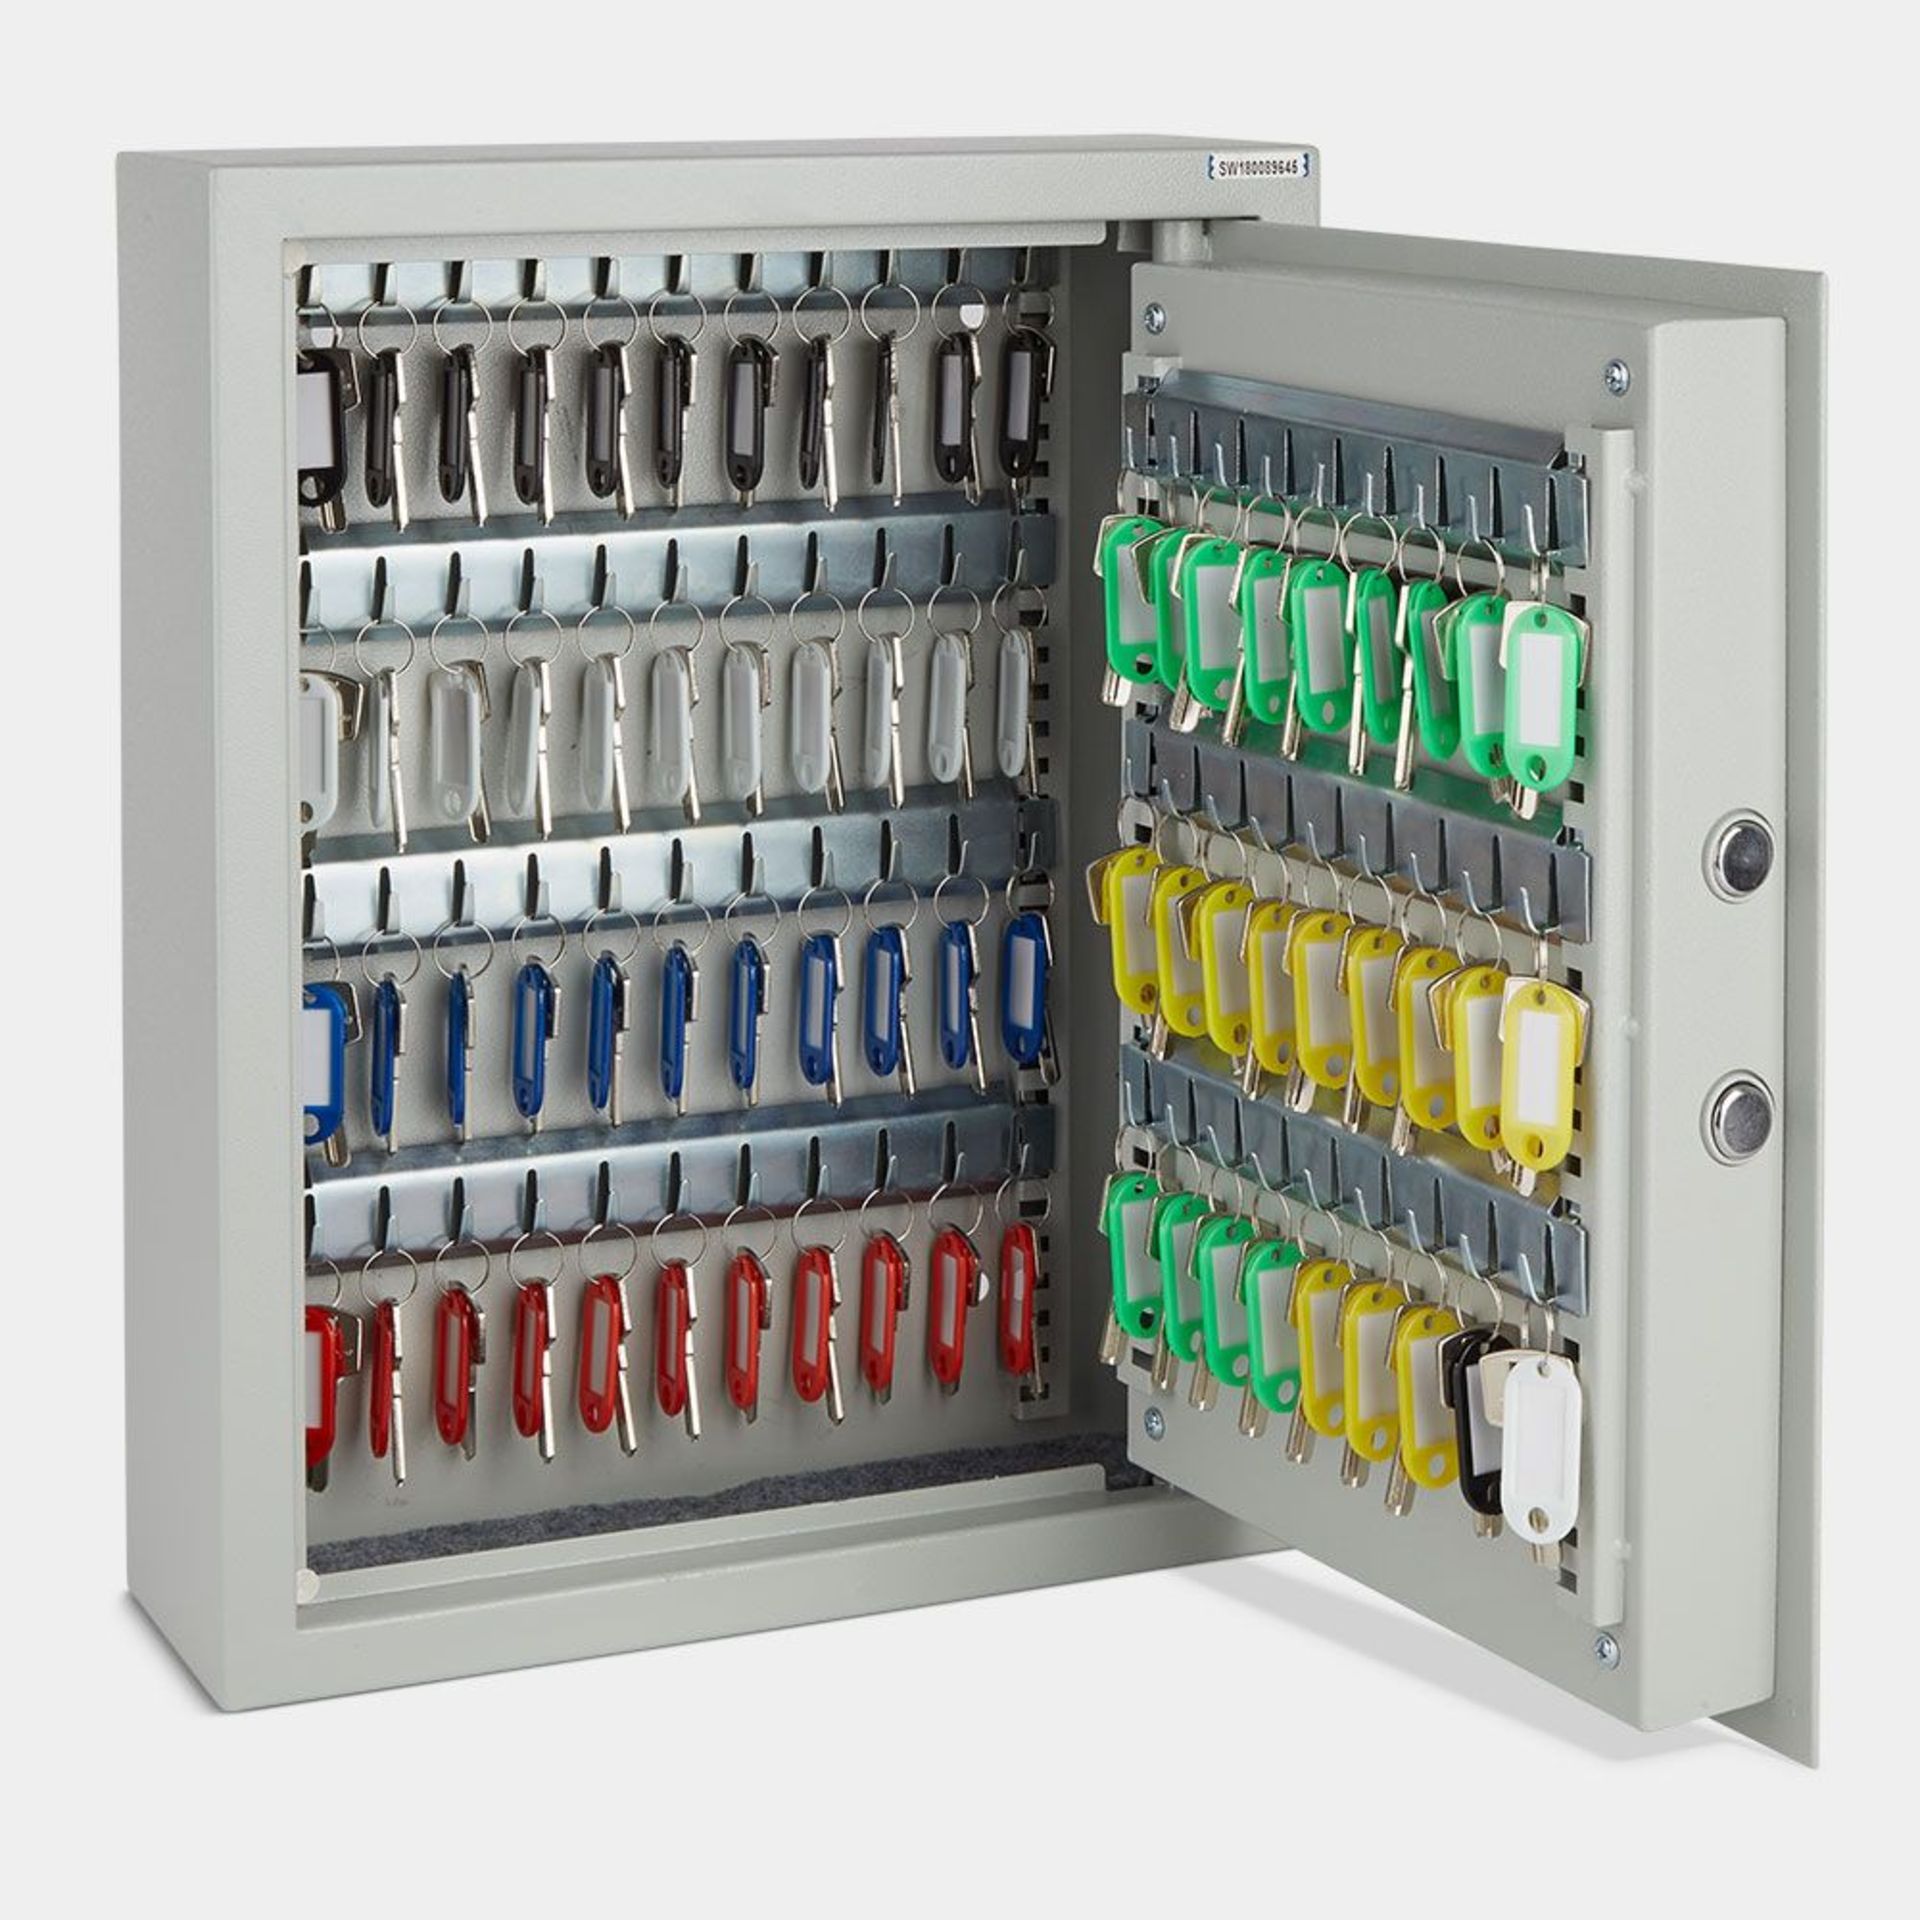 71 Key Digital Cabinet Safe. - PW. It’s packed with features to provide reliable protection from